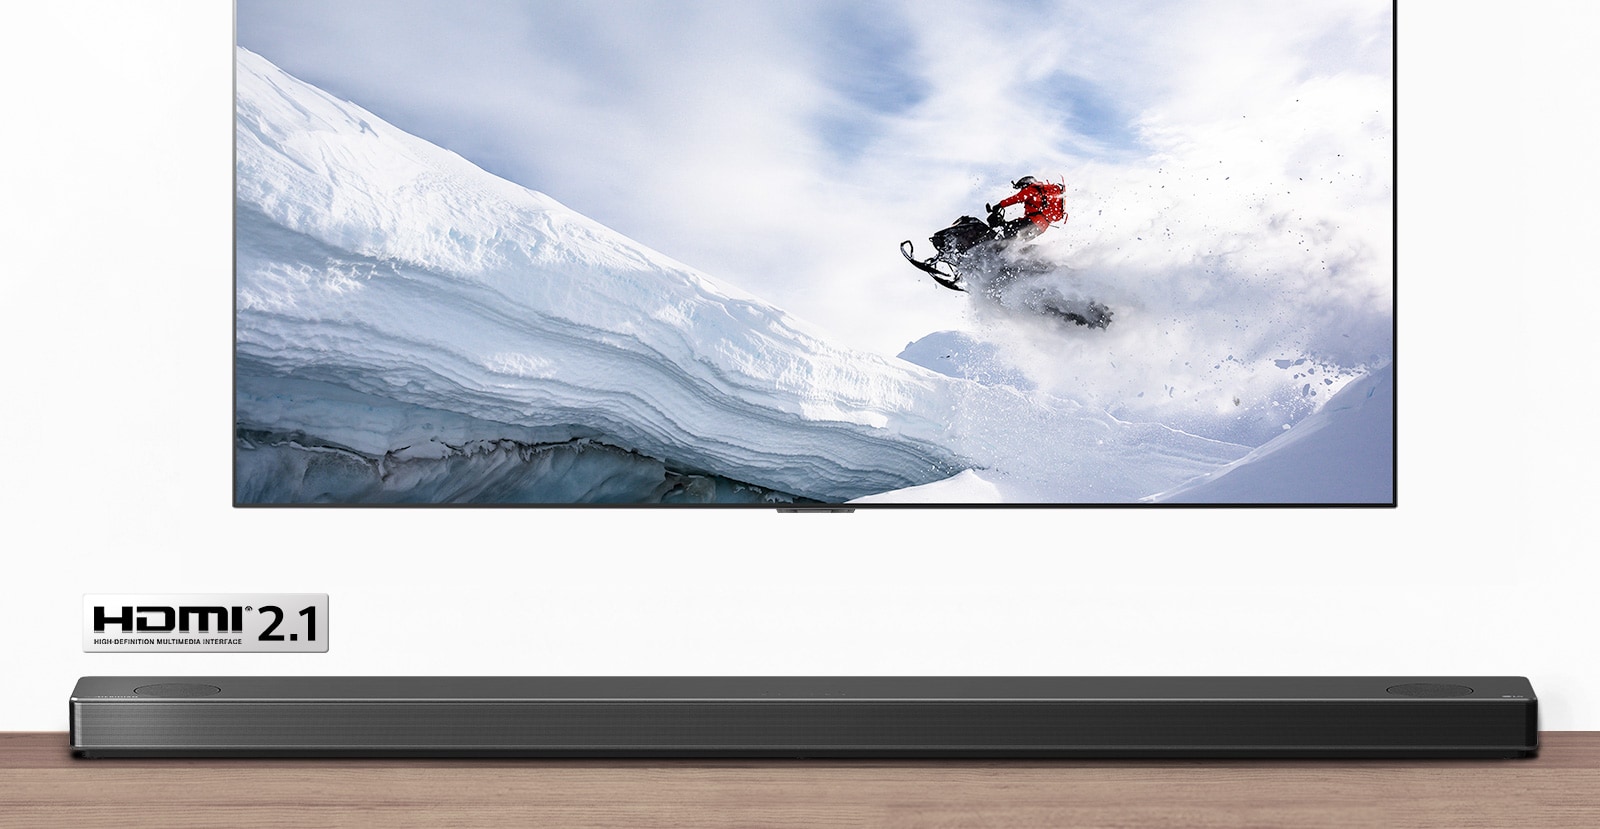 TV and Soundbar are seen from the front. TV shows man riding snowmobile in the snowy mountains. HDMI 2.1 logo is below TV. 